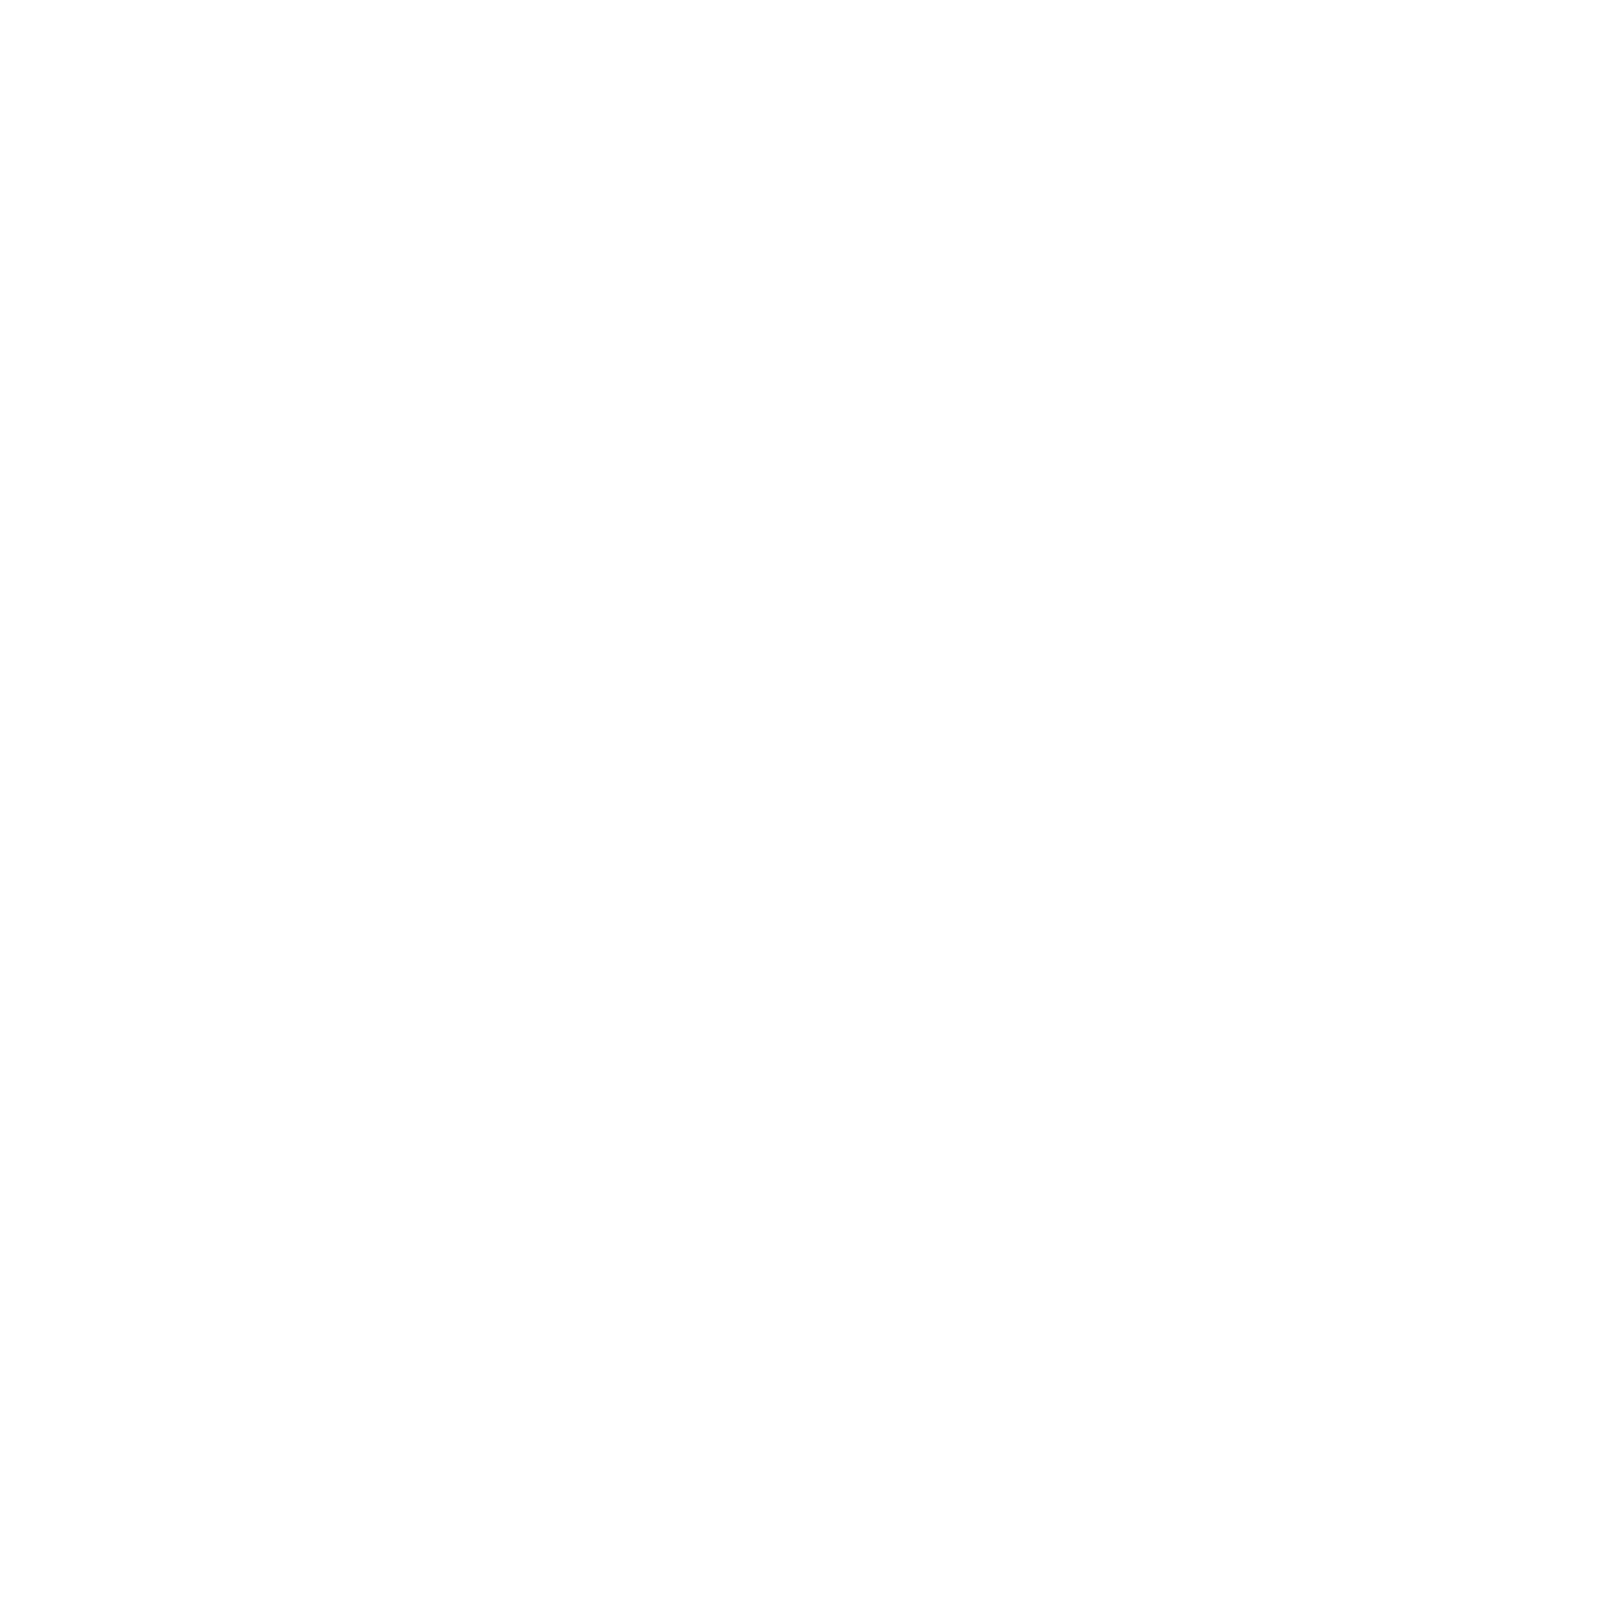 A crossed out icon with a peanut saying Envio is nut free